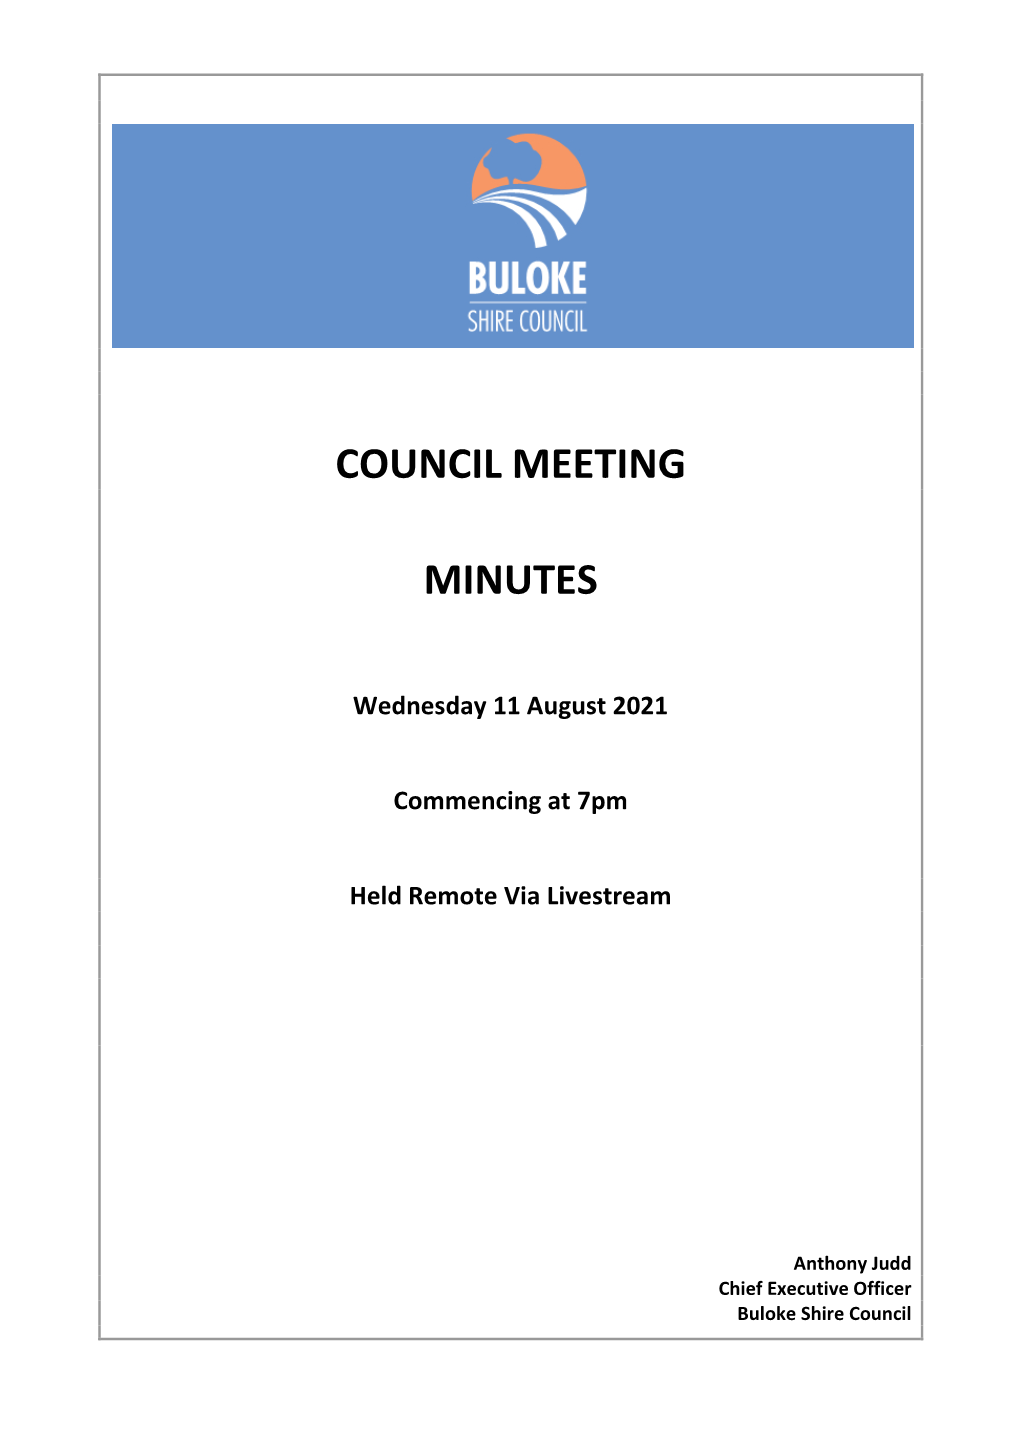 Minutes of Council Meeting